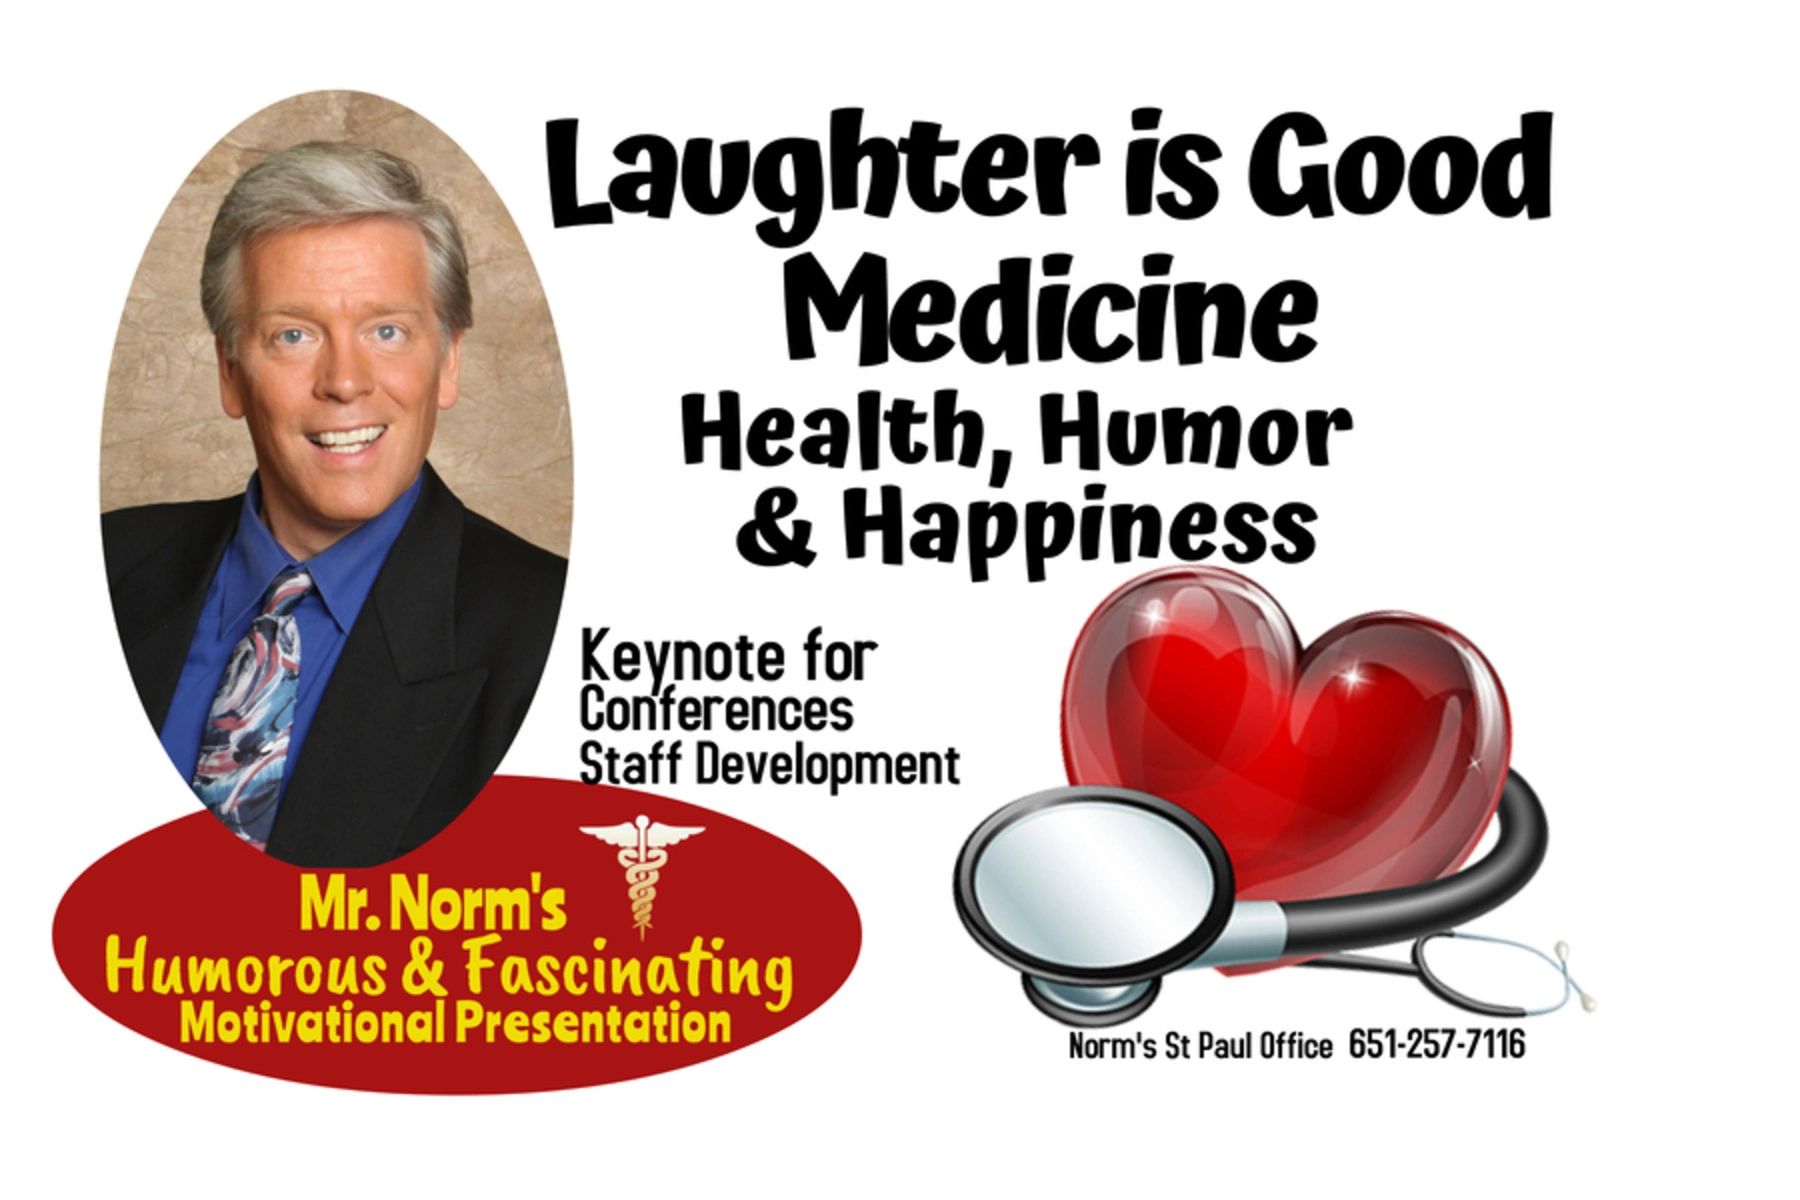 Motivational Speaker in Minneapolis on benefits of Health, Humor and Happiness.